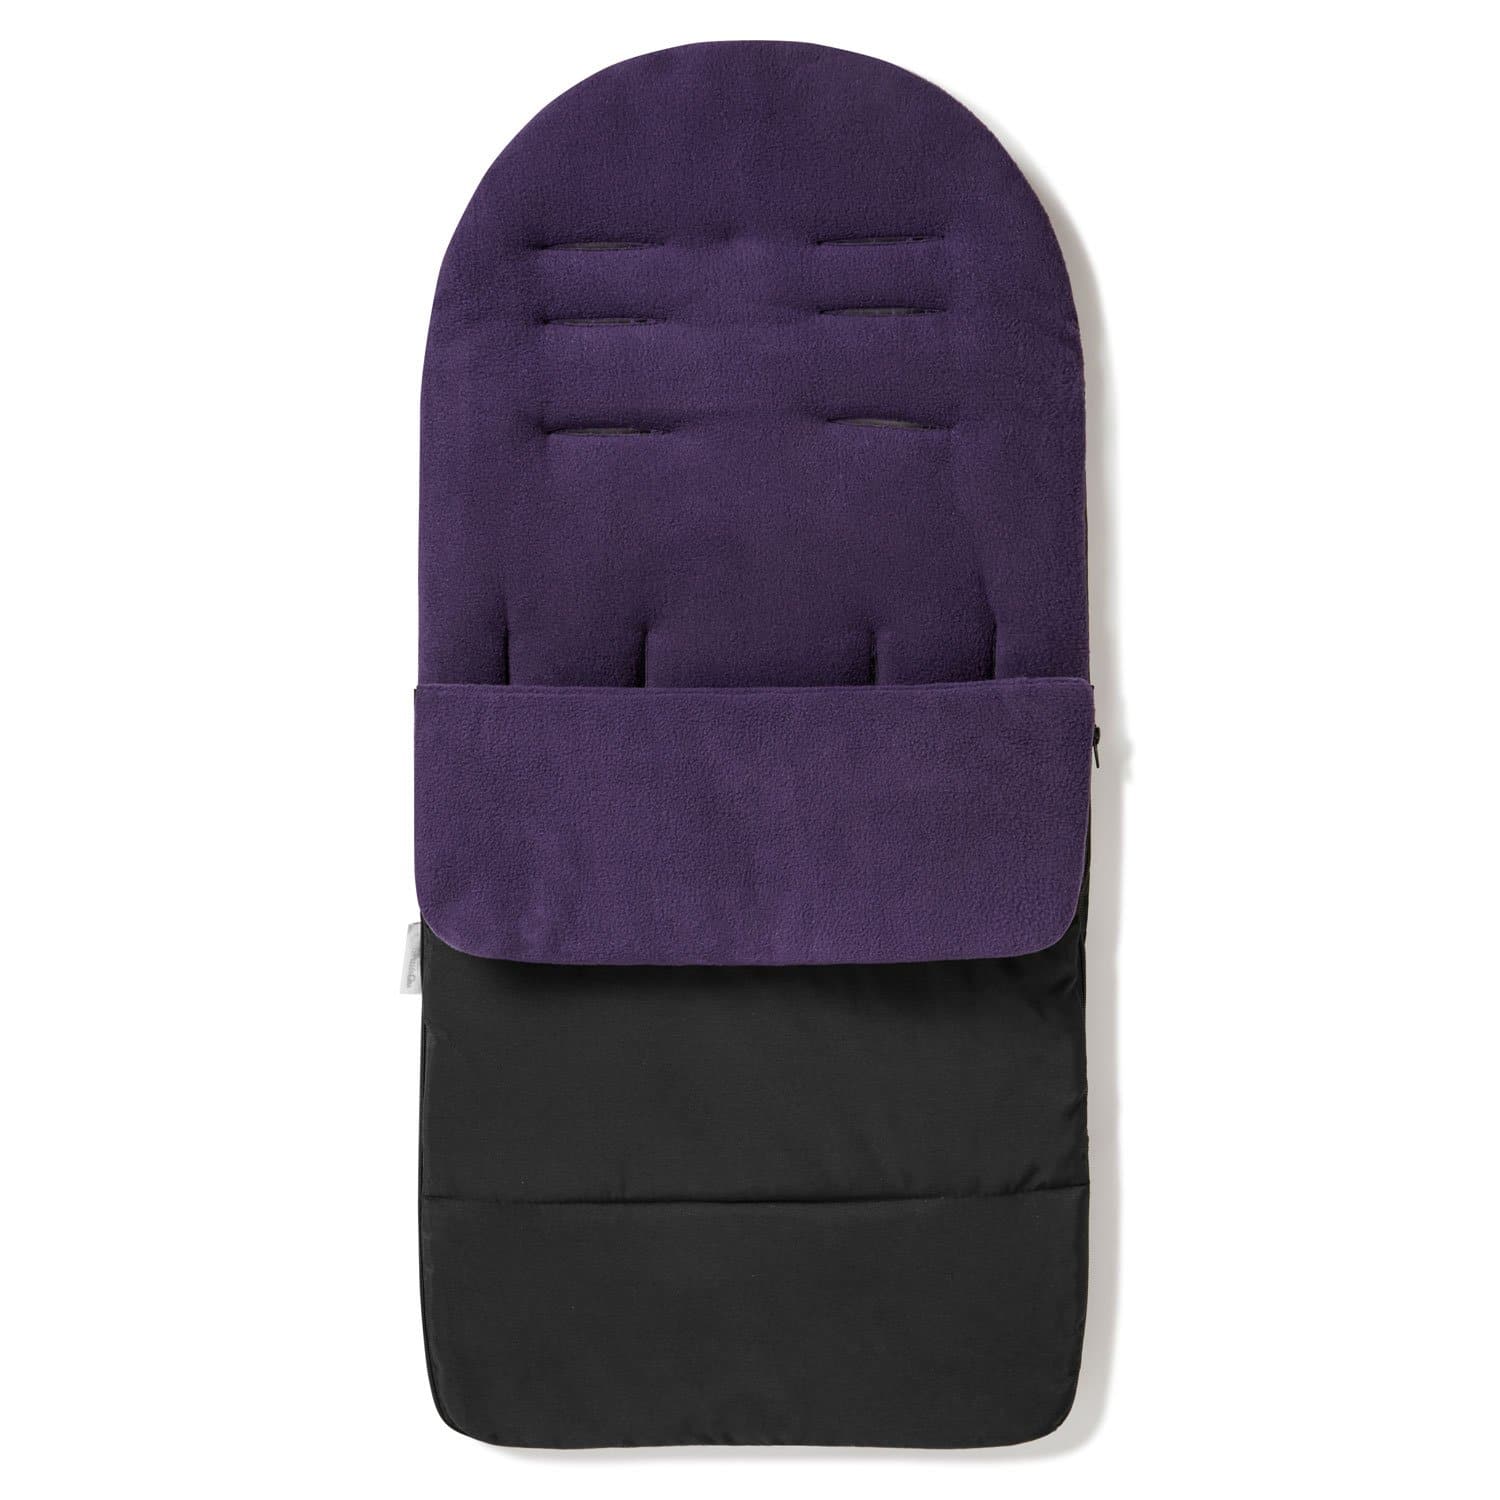 Premium Footmuff / Cosy Toes Compatible with Joolz - Plum Purple / Fits All Models | For Your Little One